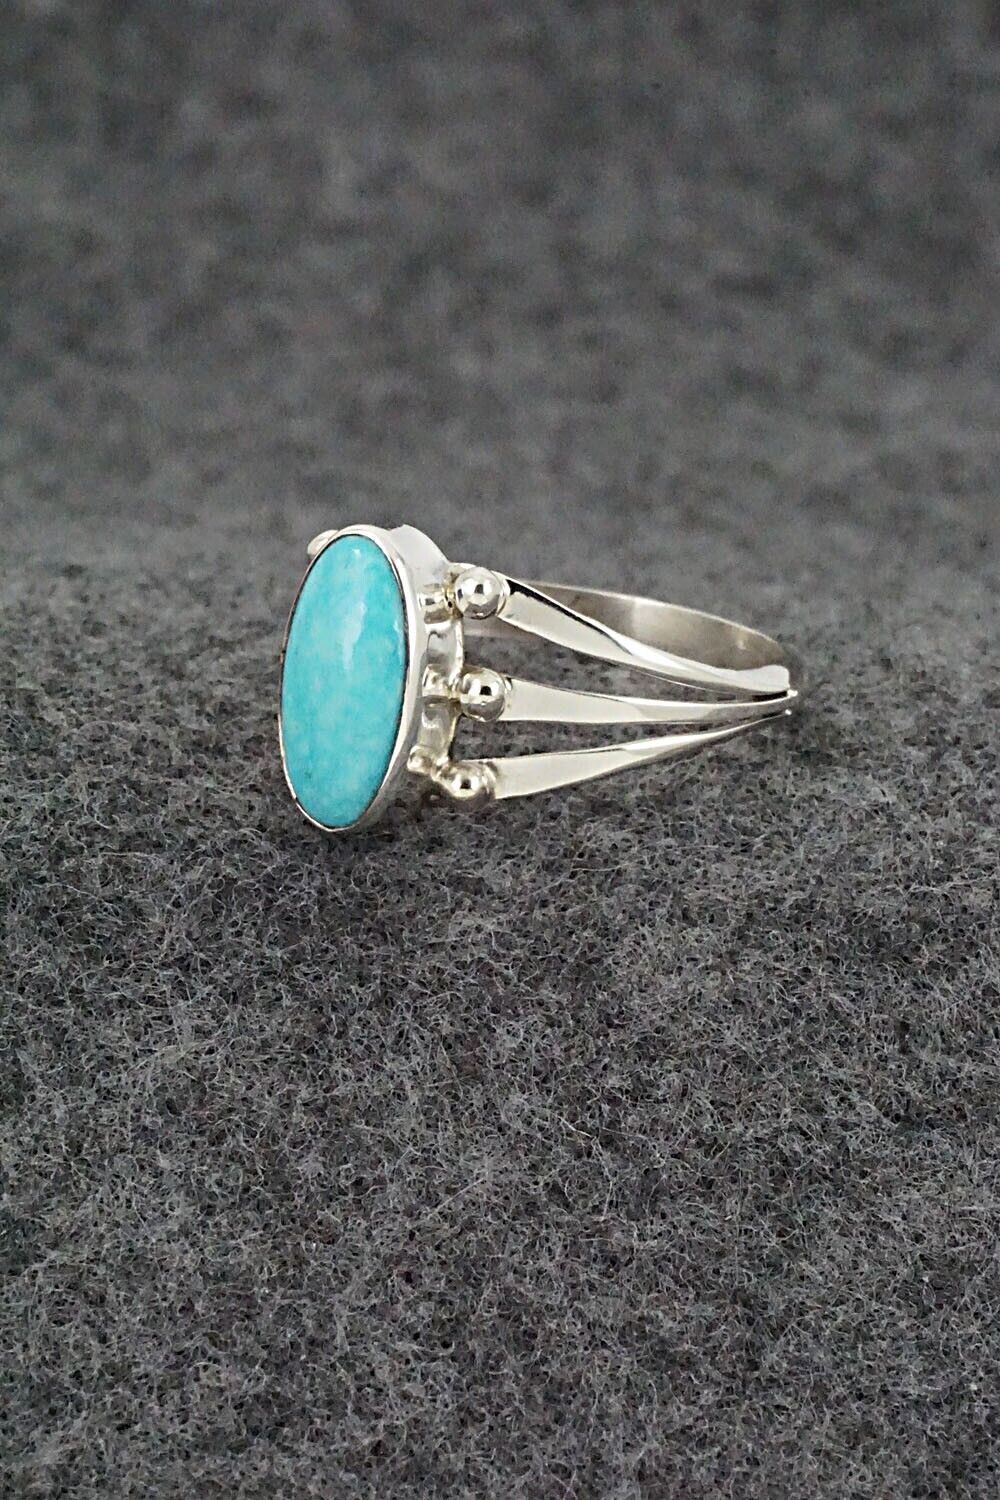 Turquoise & Sterling Silver Ring - Paige Gordon - Size 9